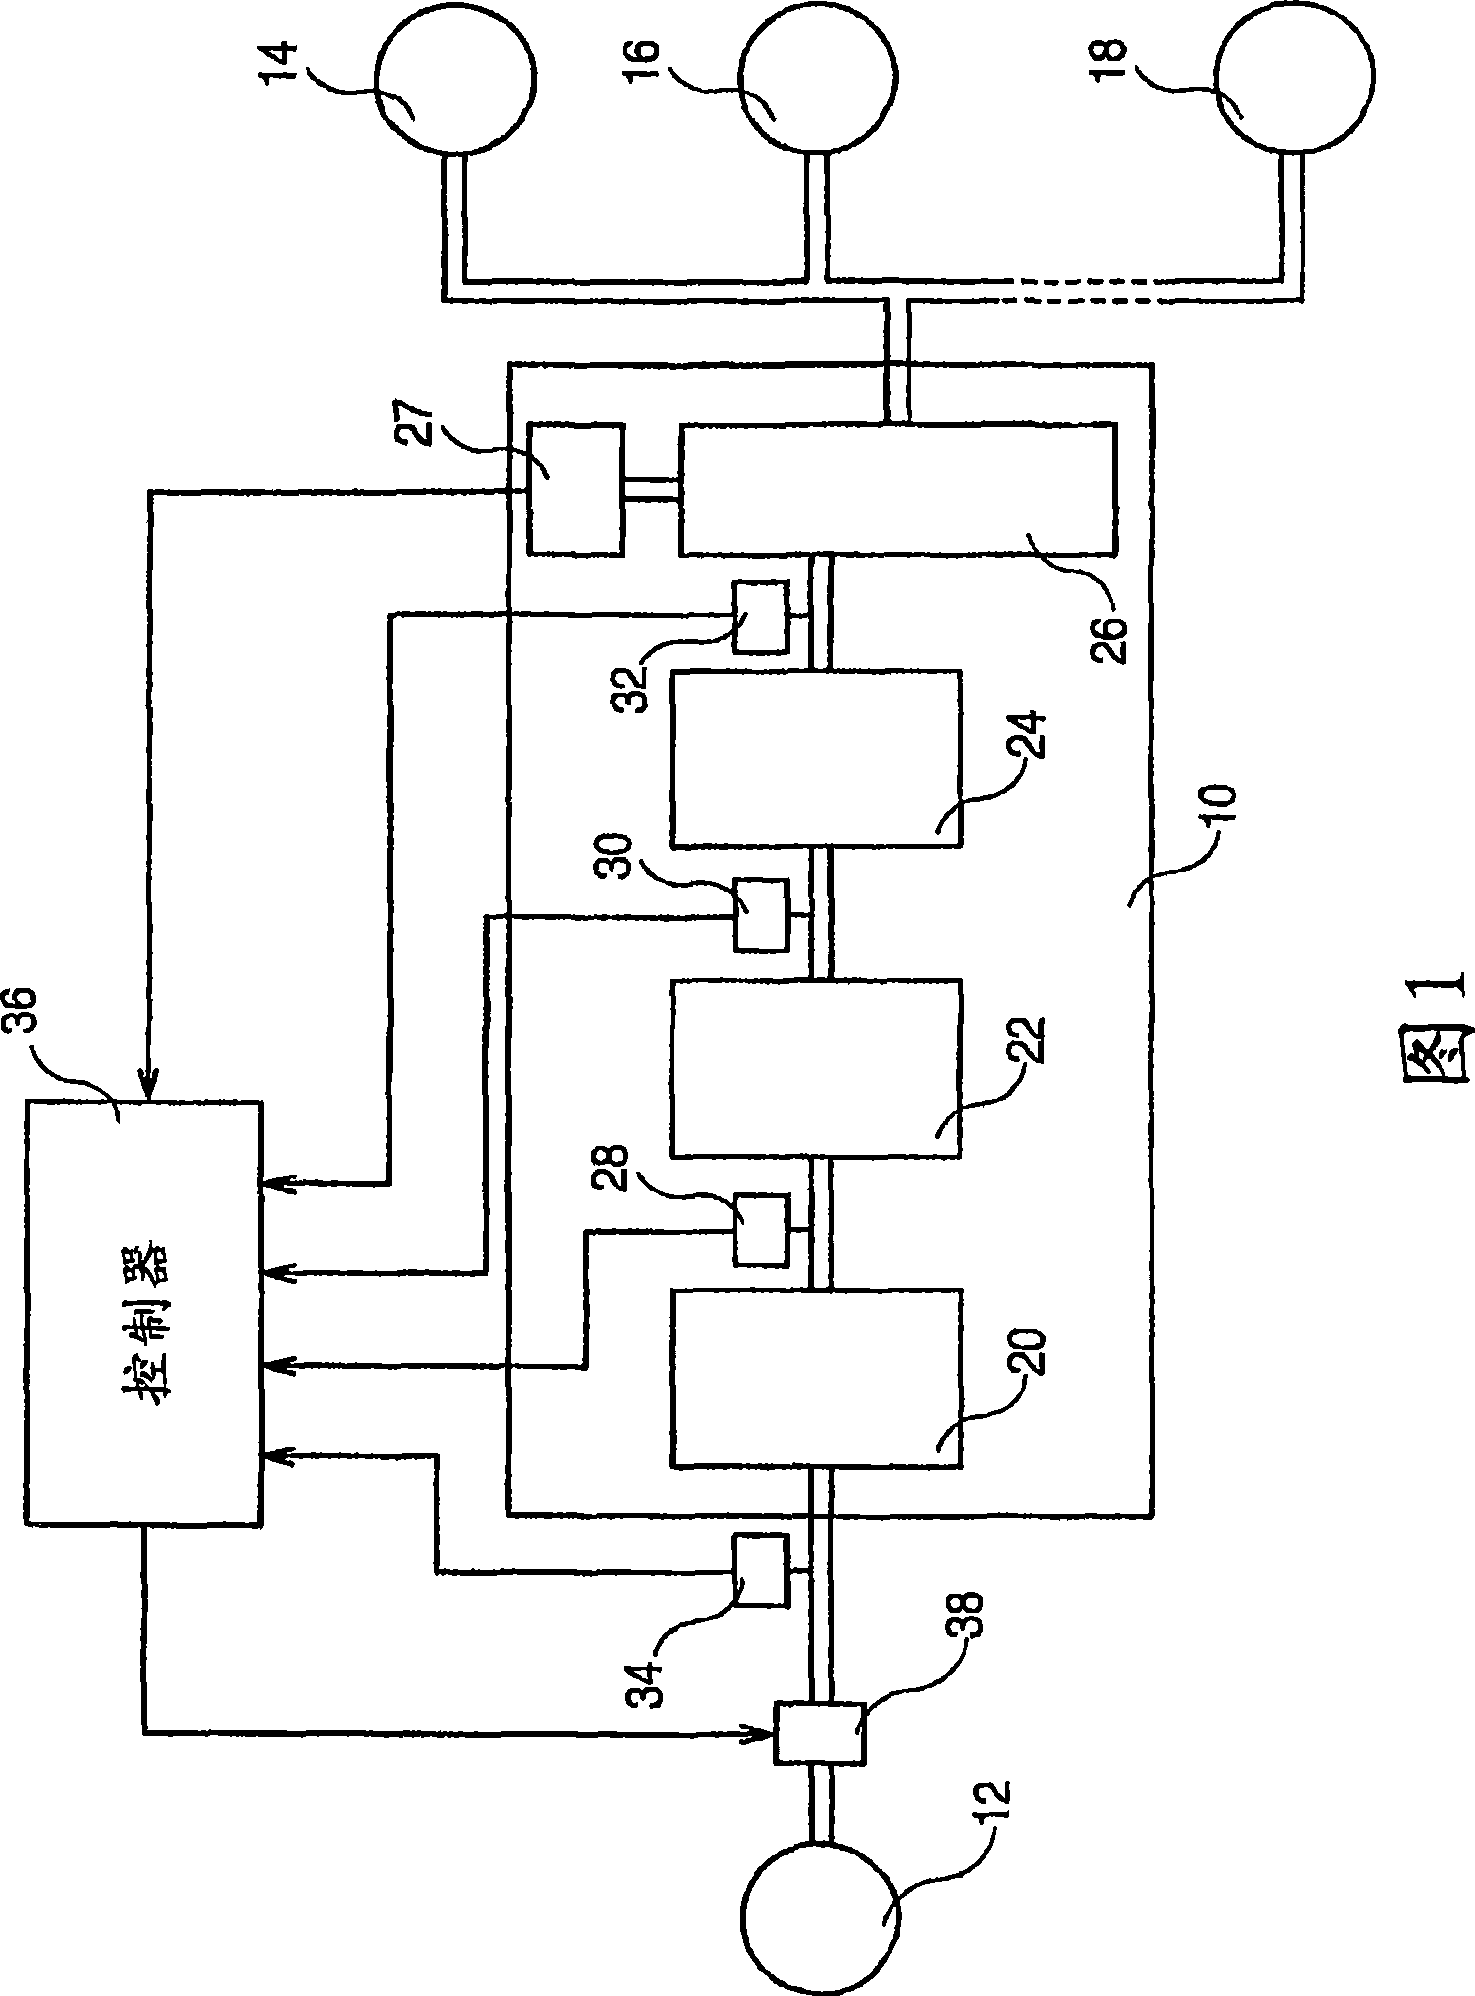 System for filtrating and removing virus in waterhead